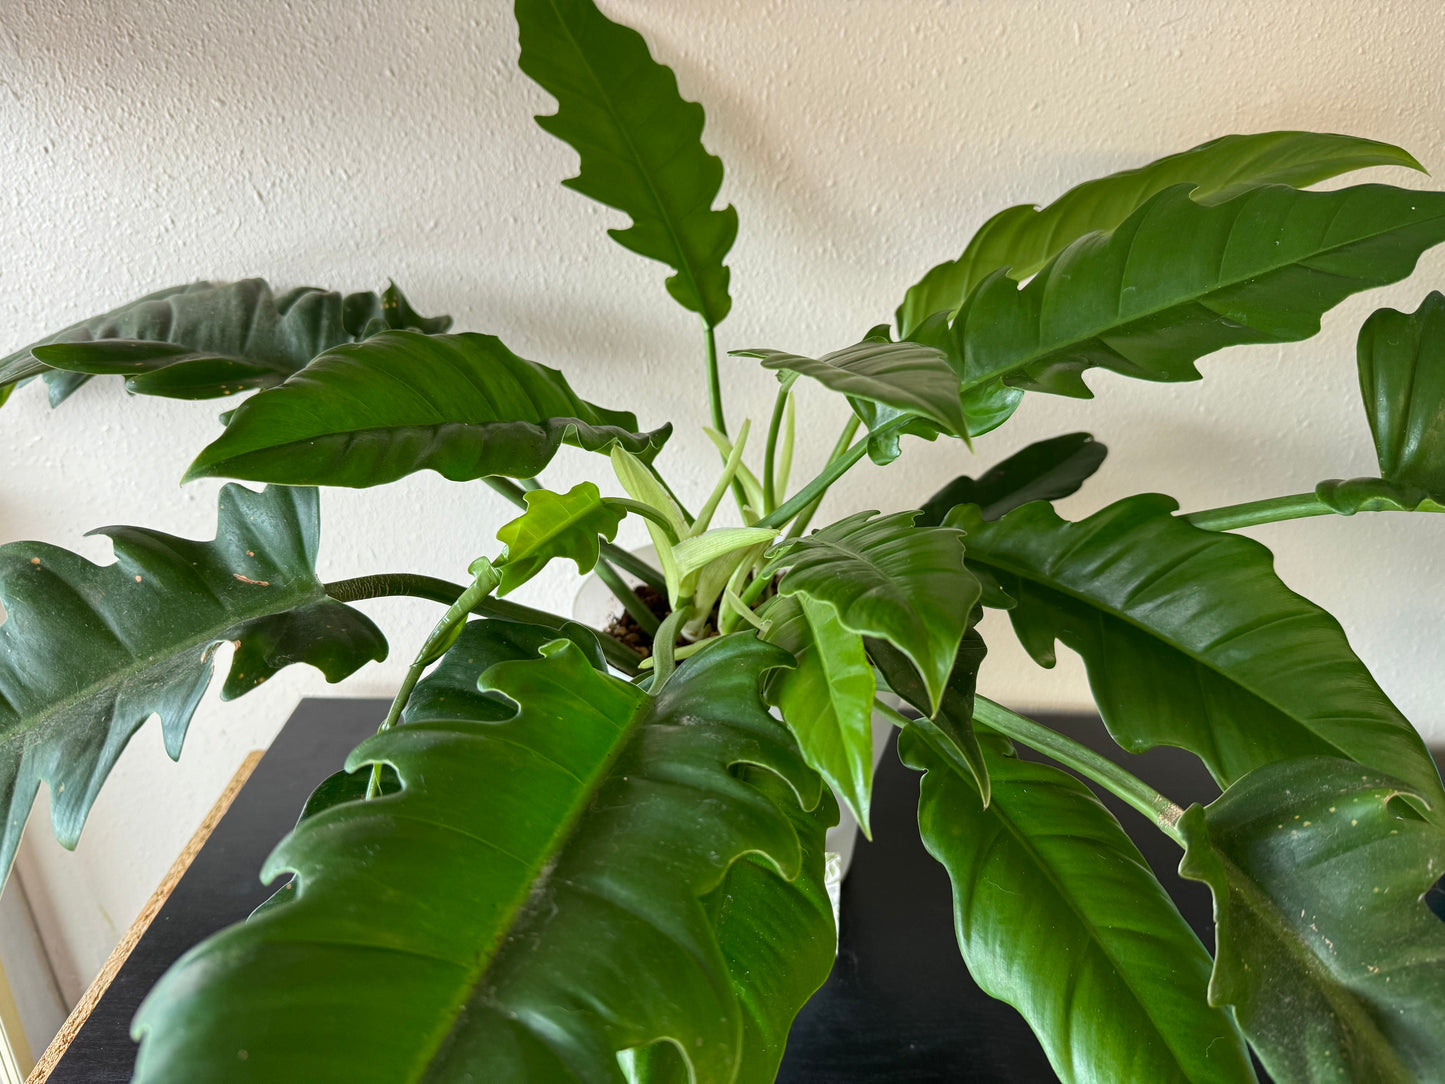 Tiger tooth Philodendron plant